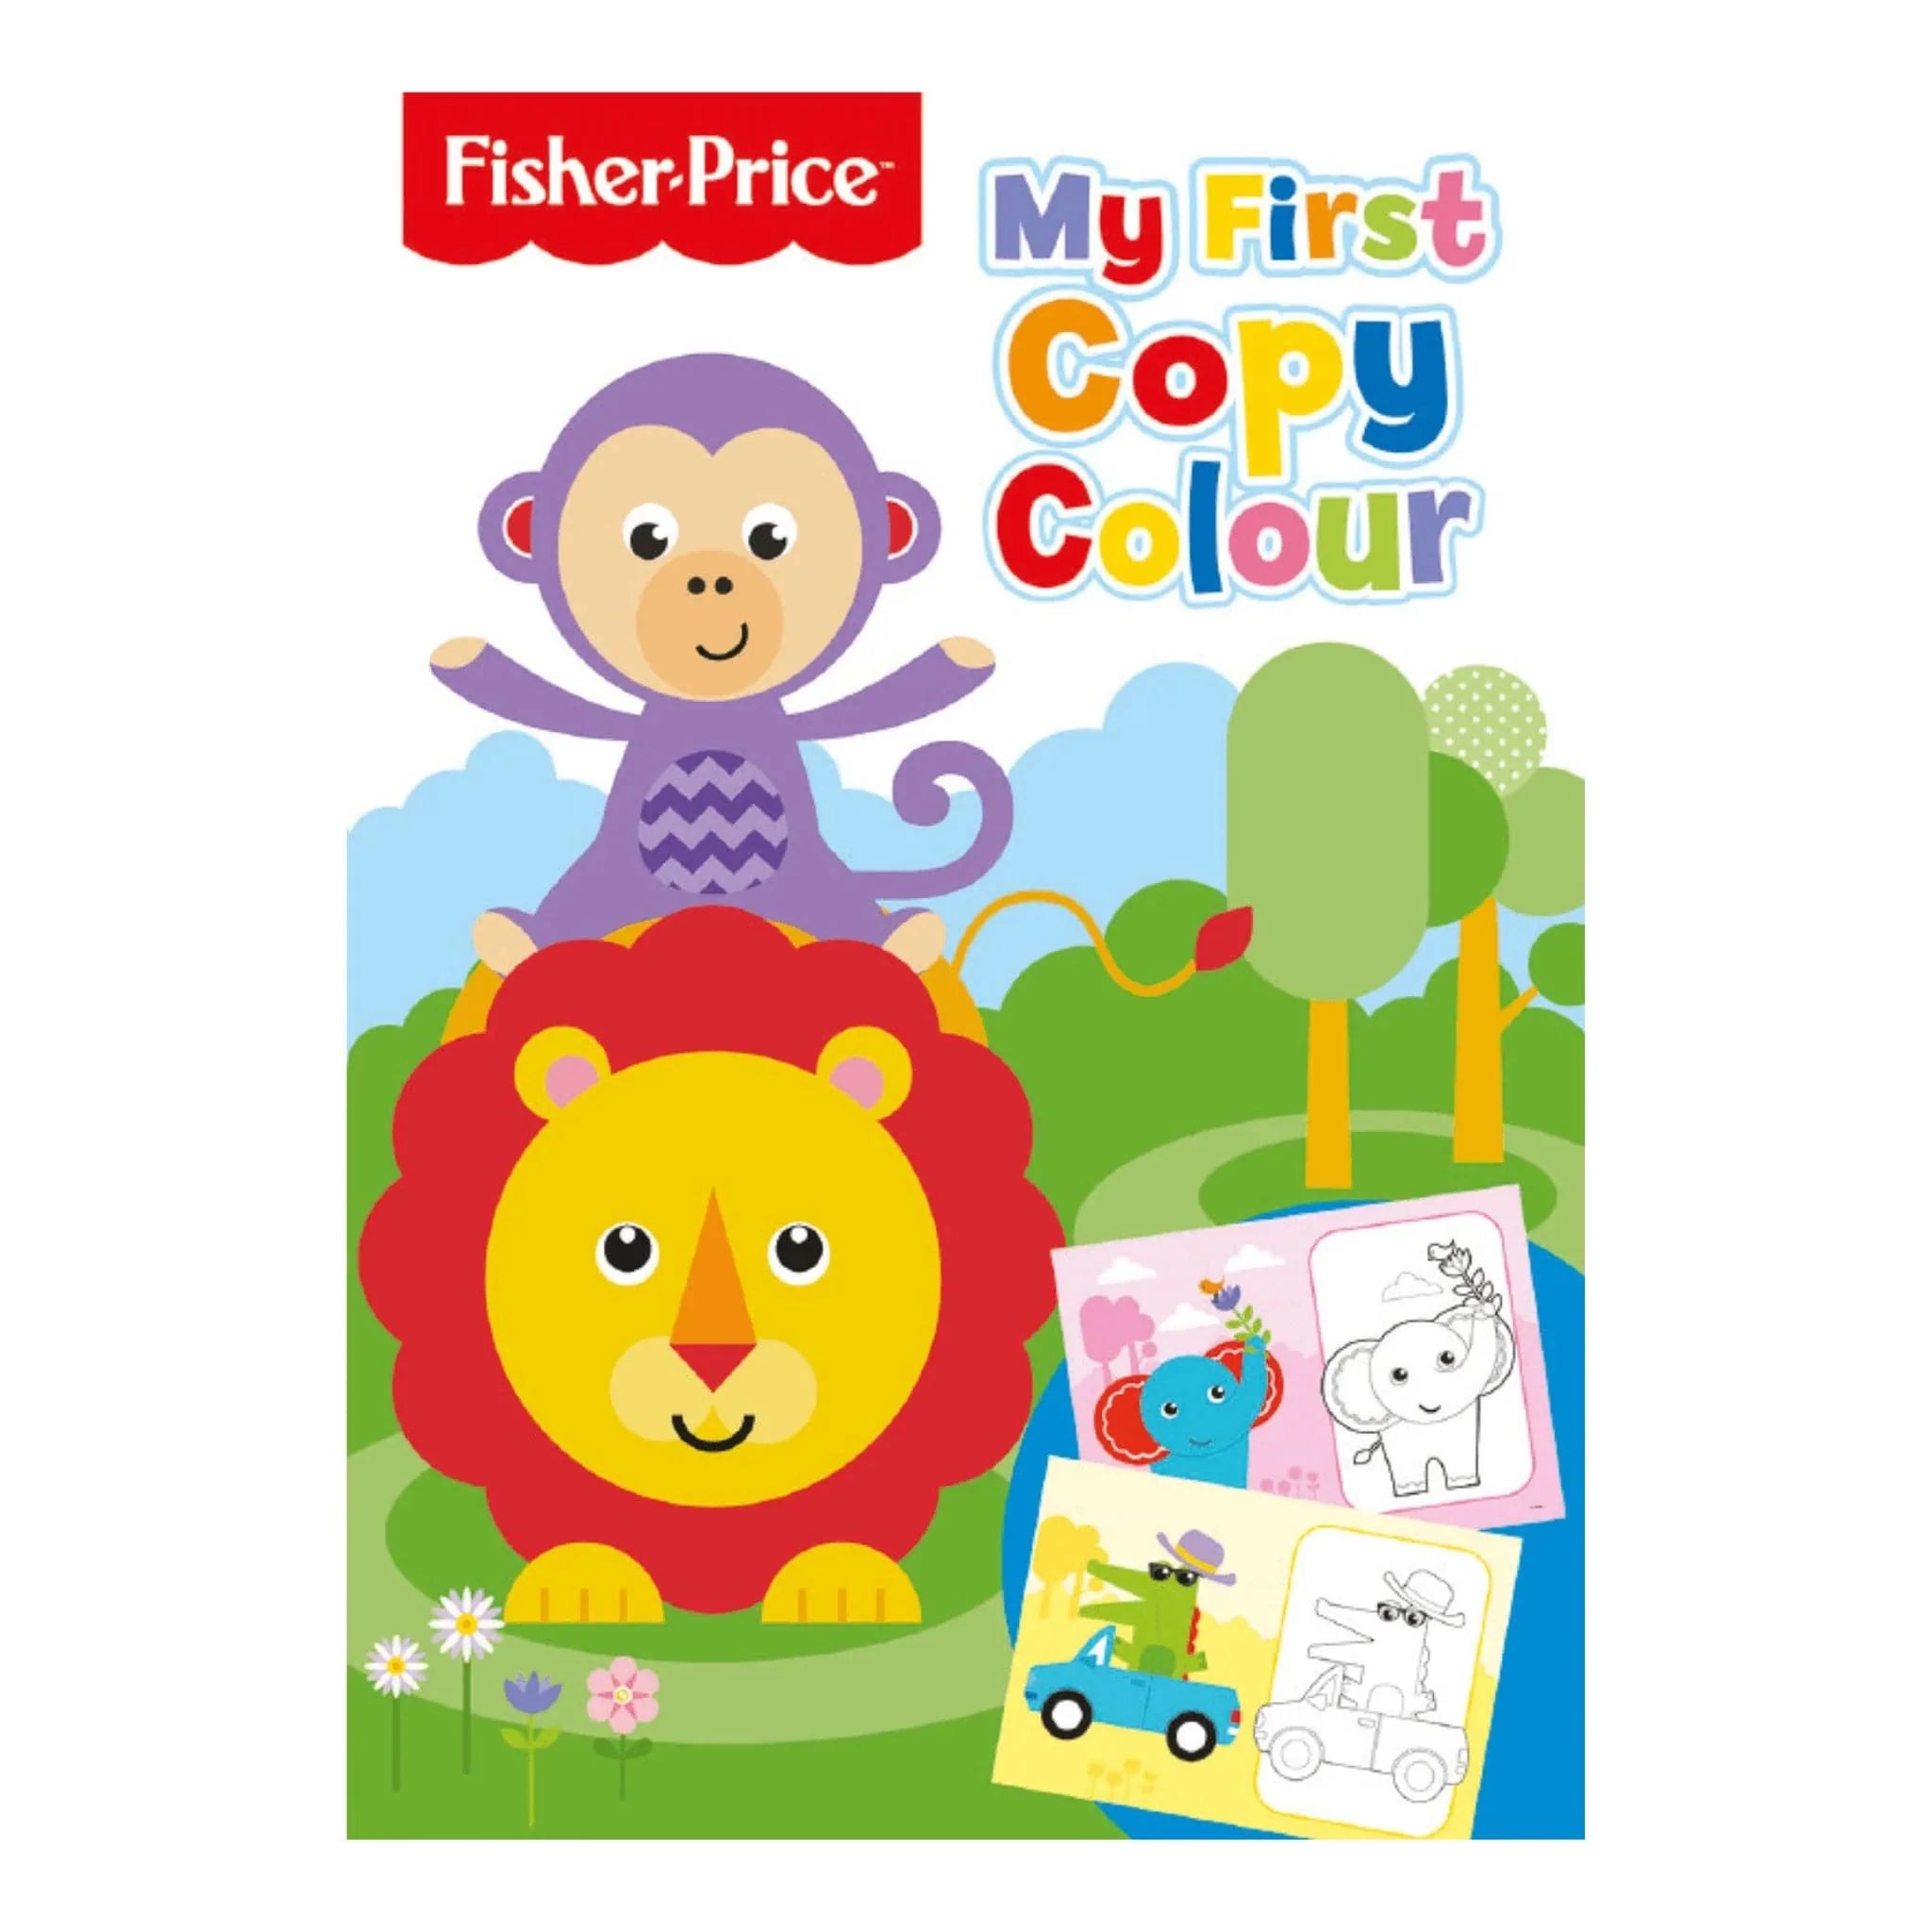 Fisher Price My First Copy Colour Book - Kids Party Craft